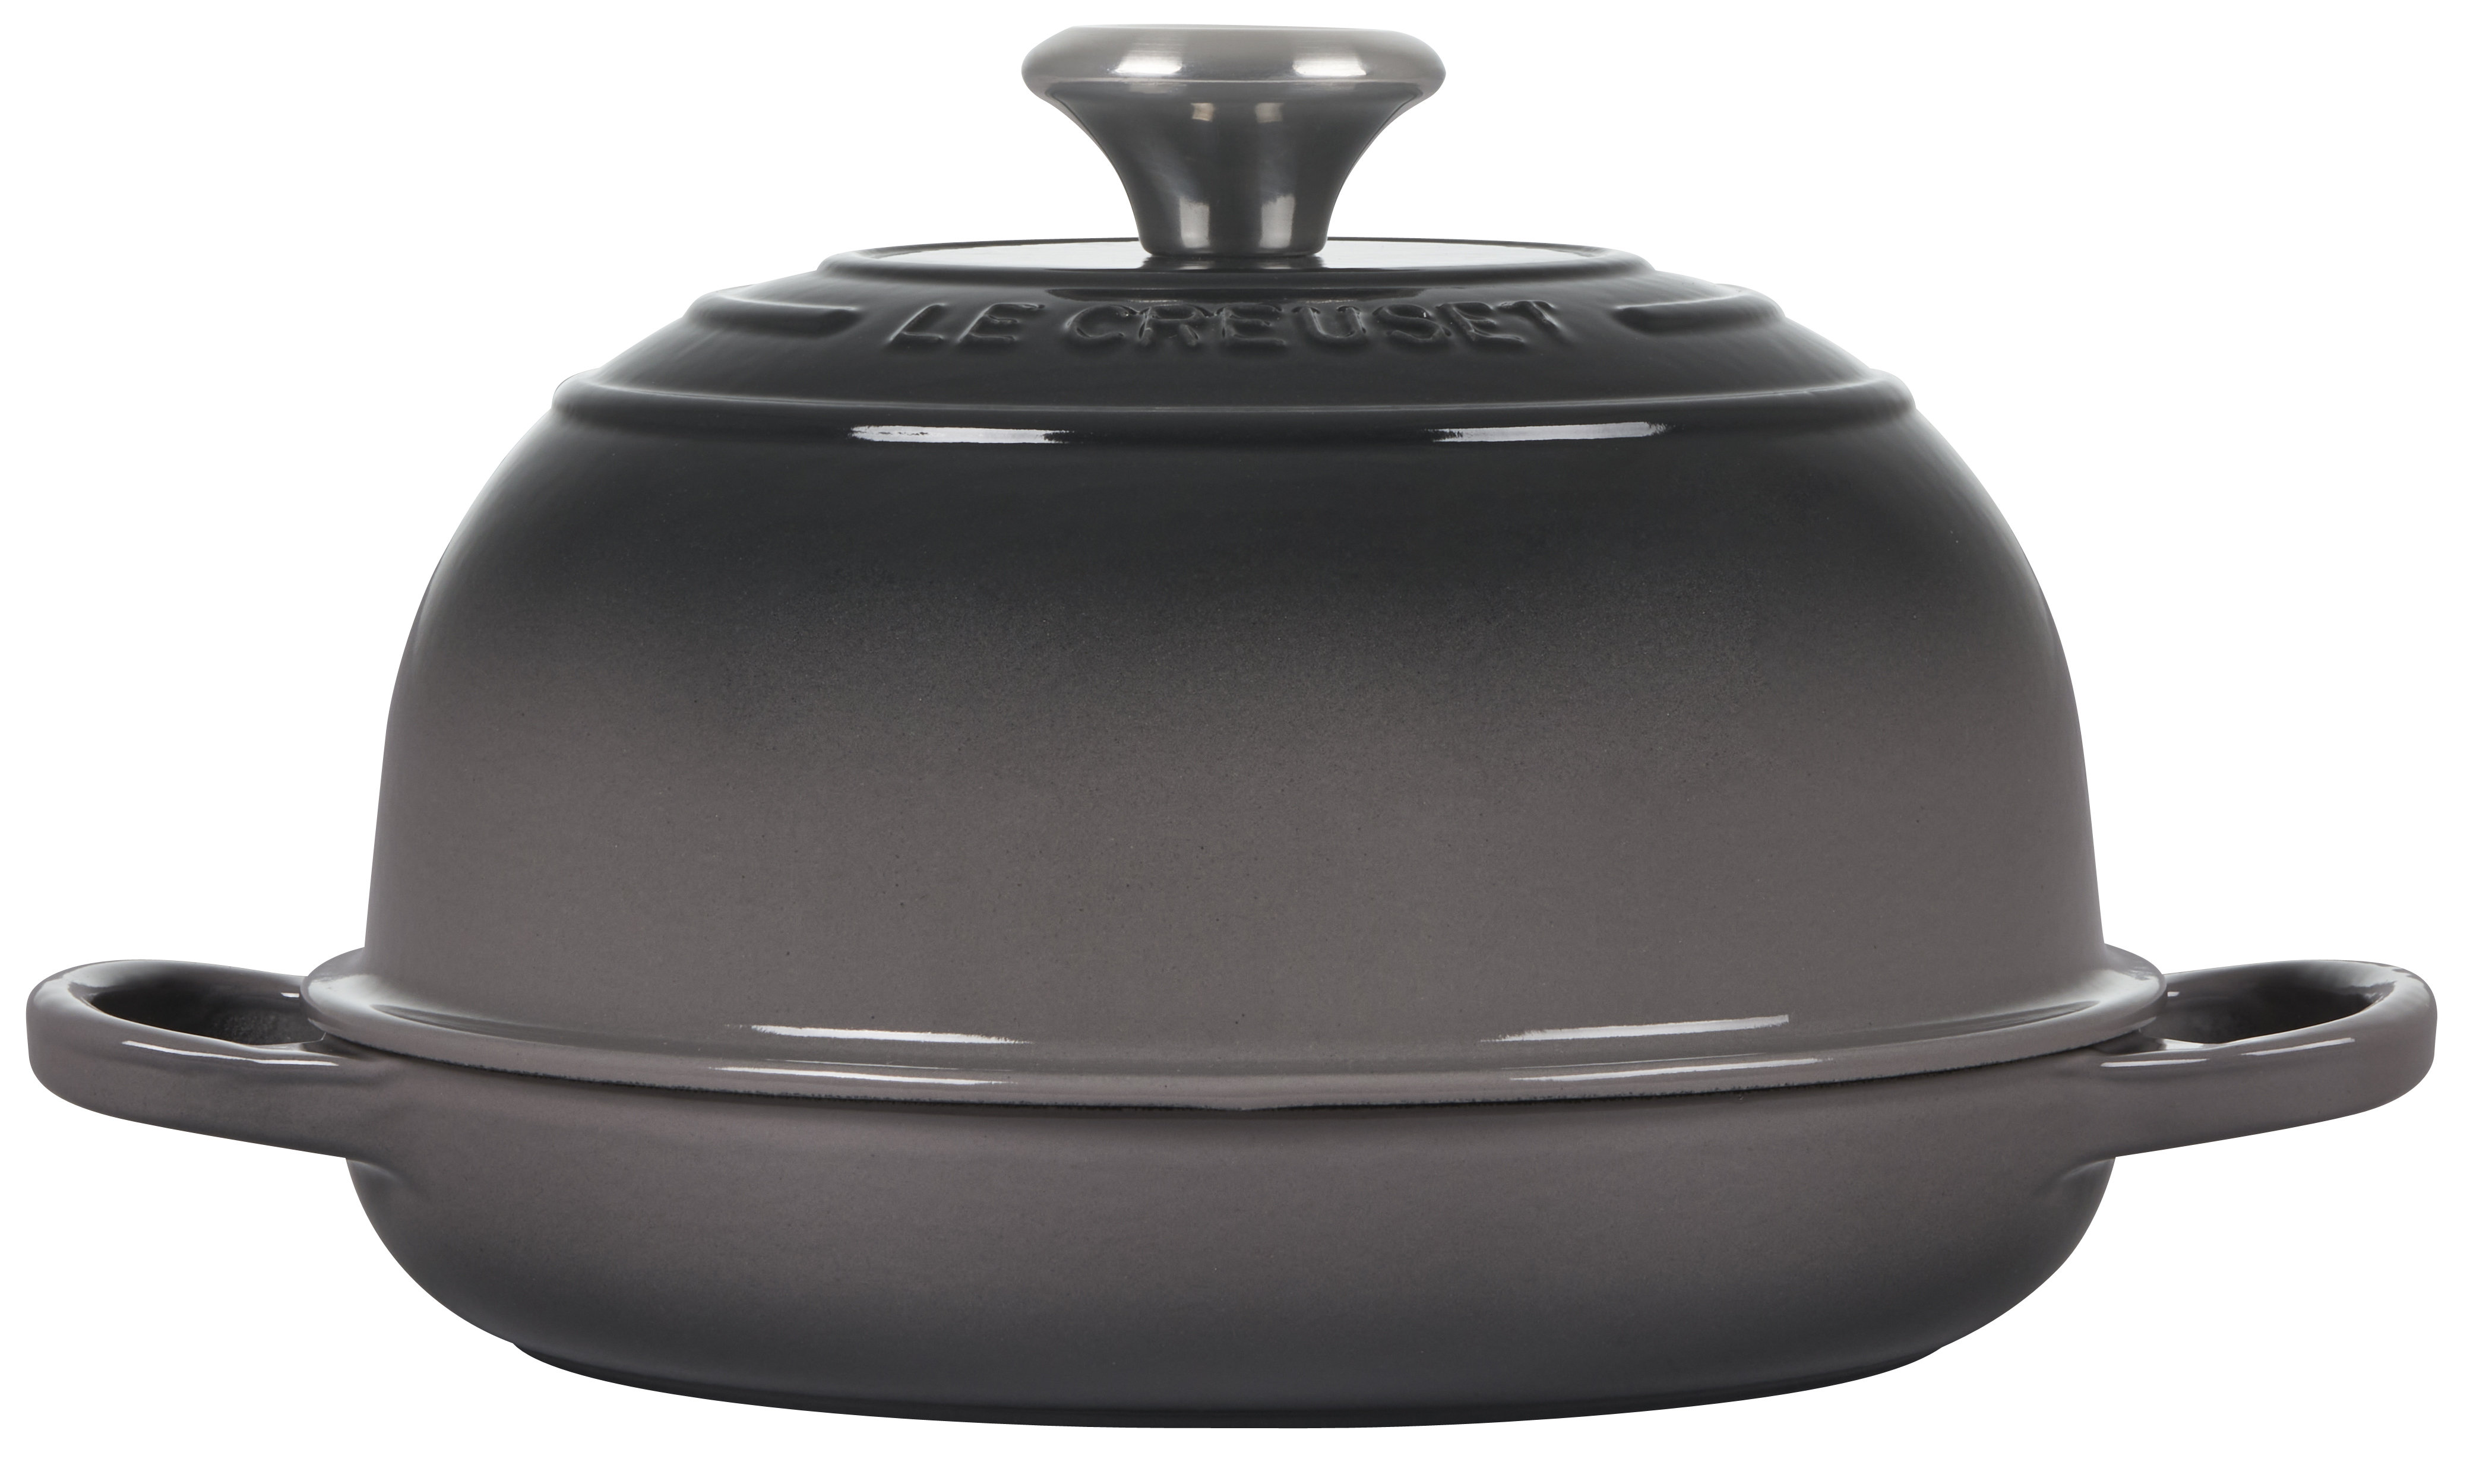 Le Creuset Signature 1.75-Qt. Oyster Grey Enameled Cast Iron Saucepan with  Lid + Reviews